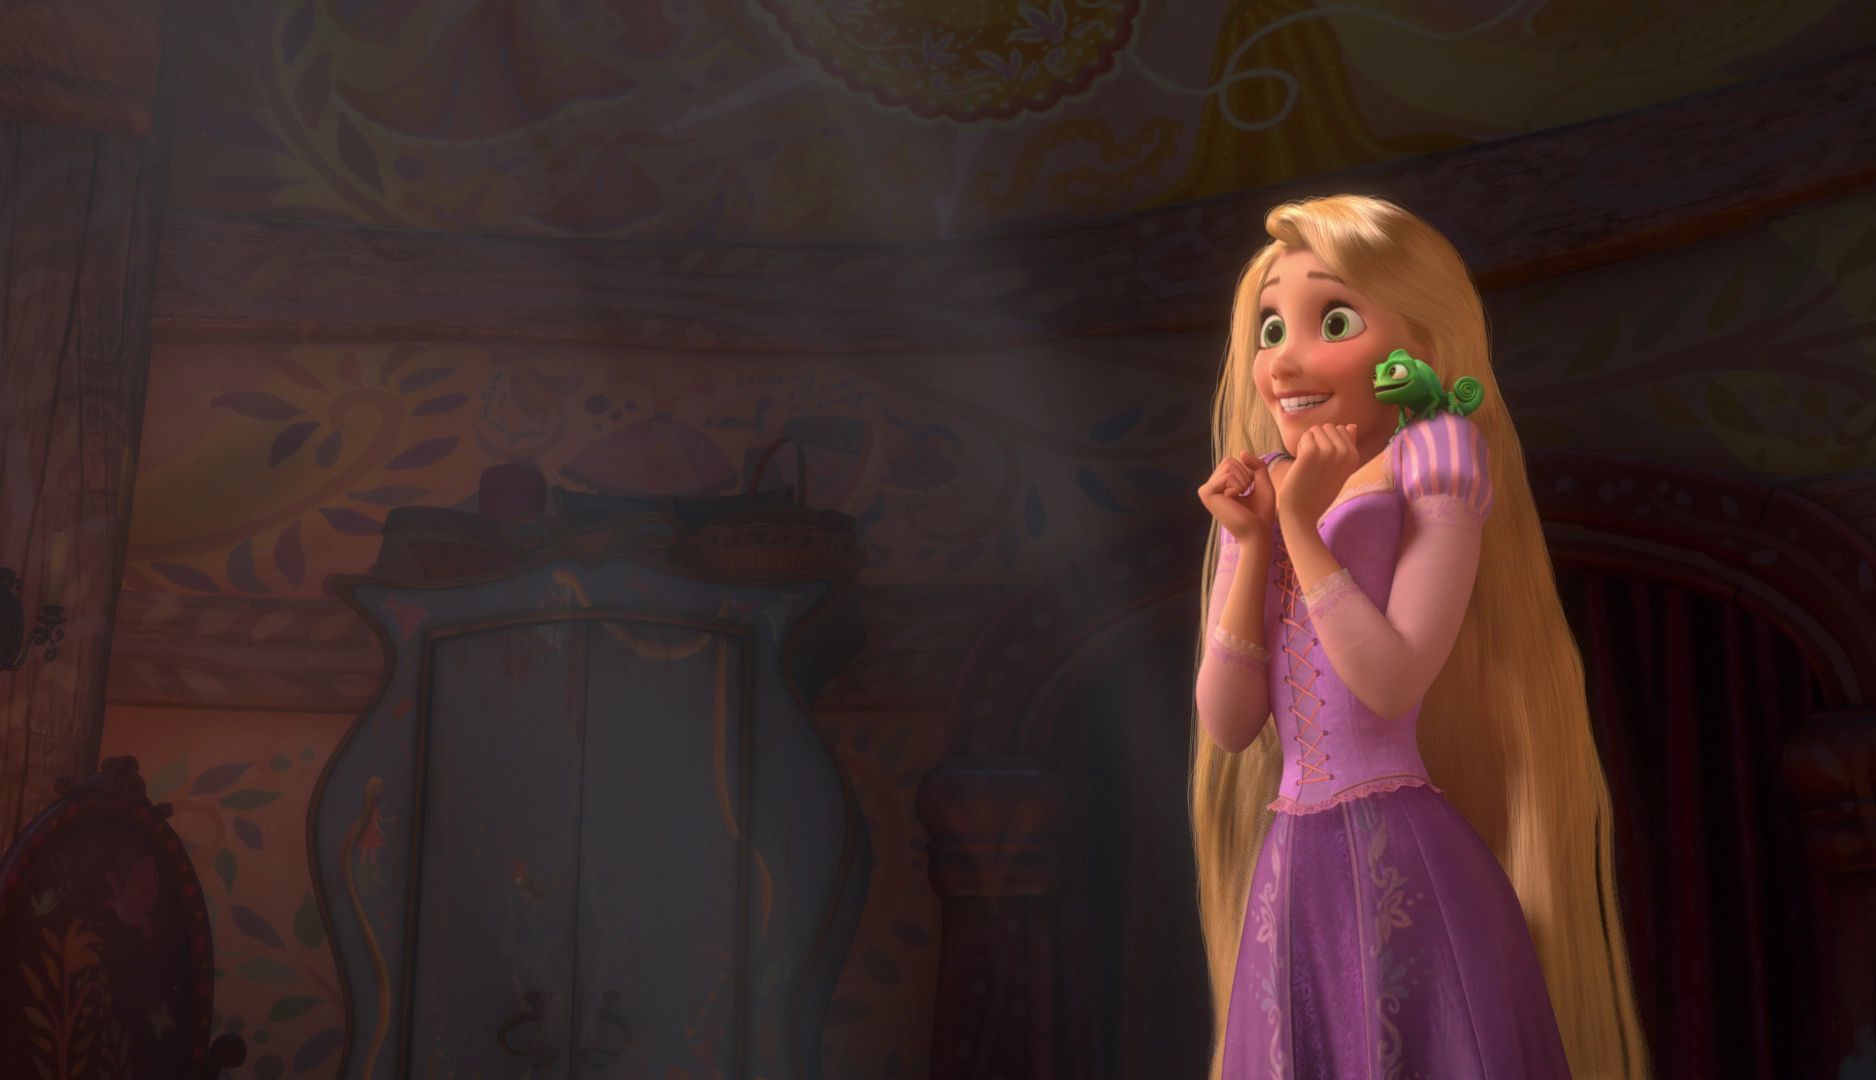 Tangled Images on Fanpop.